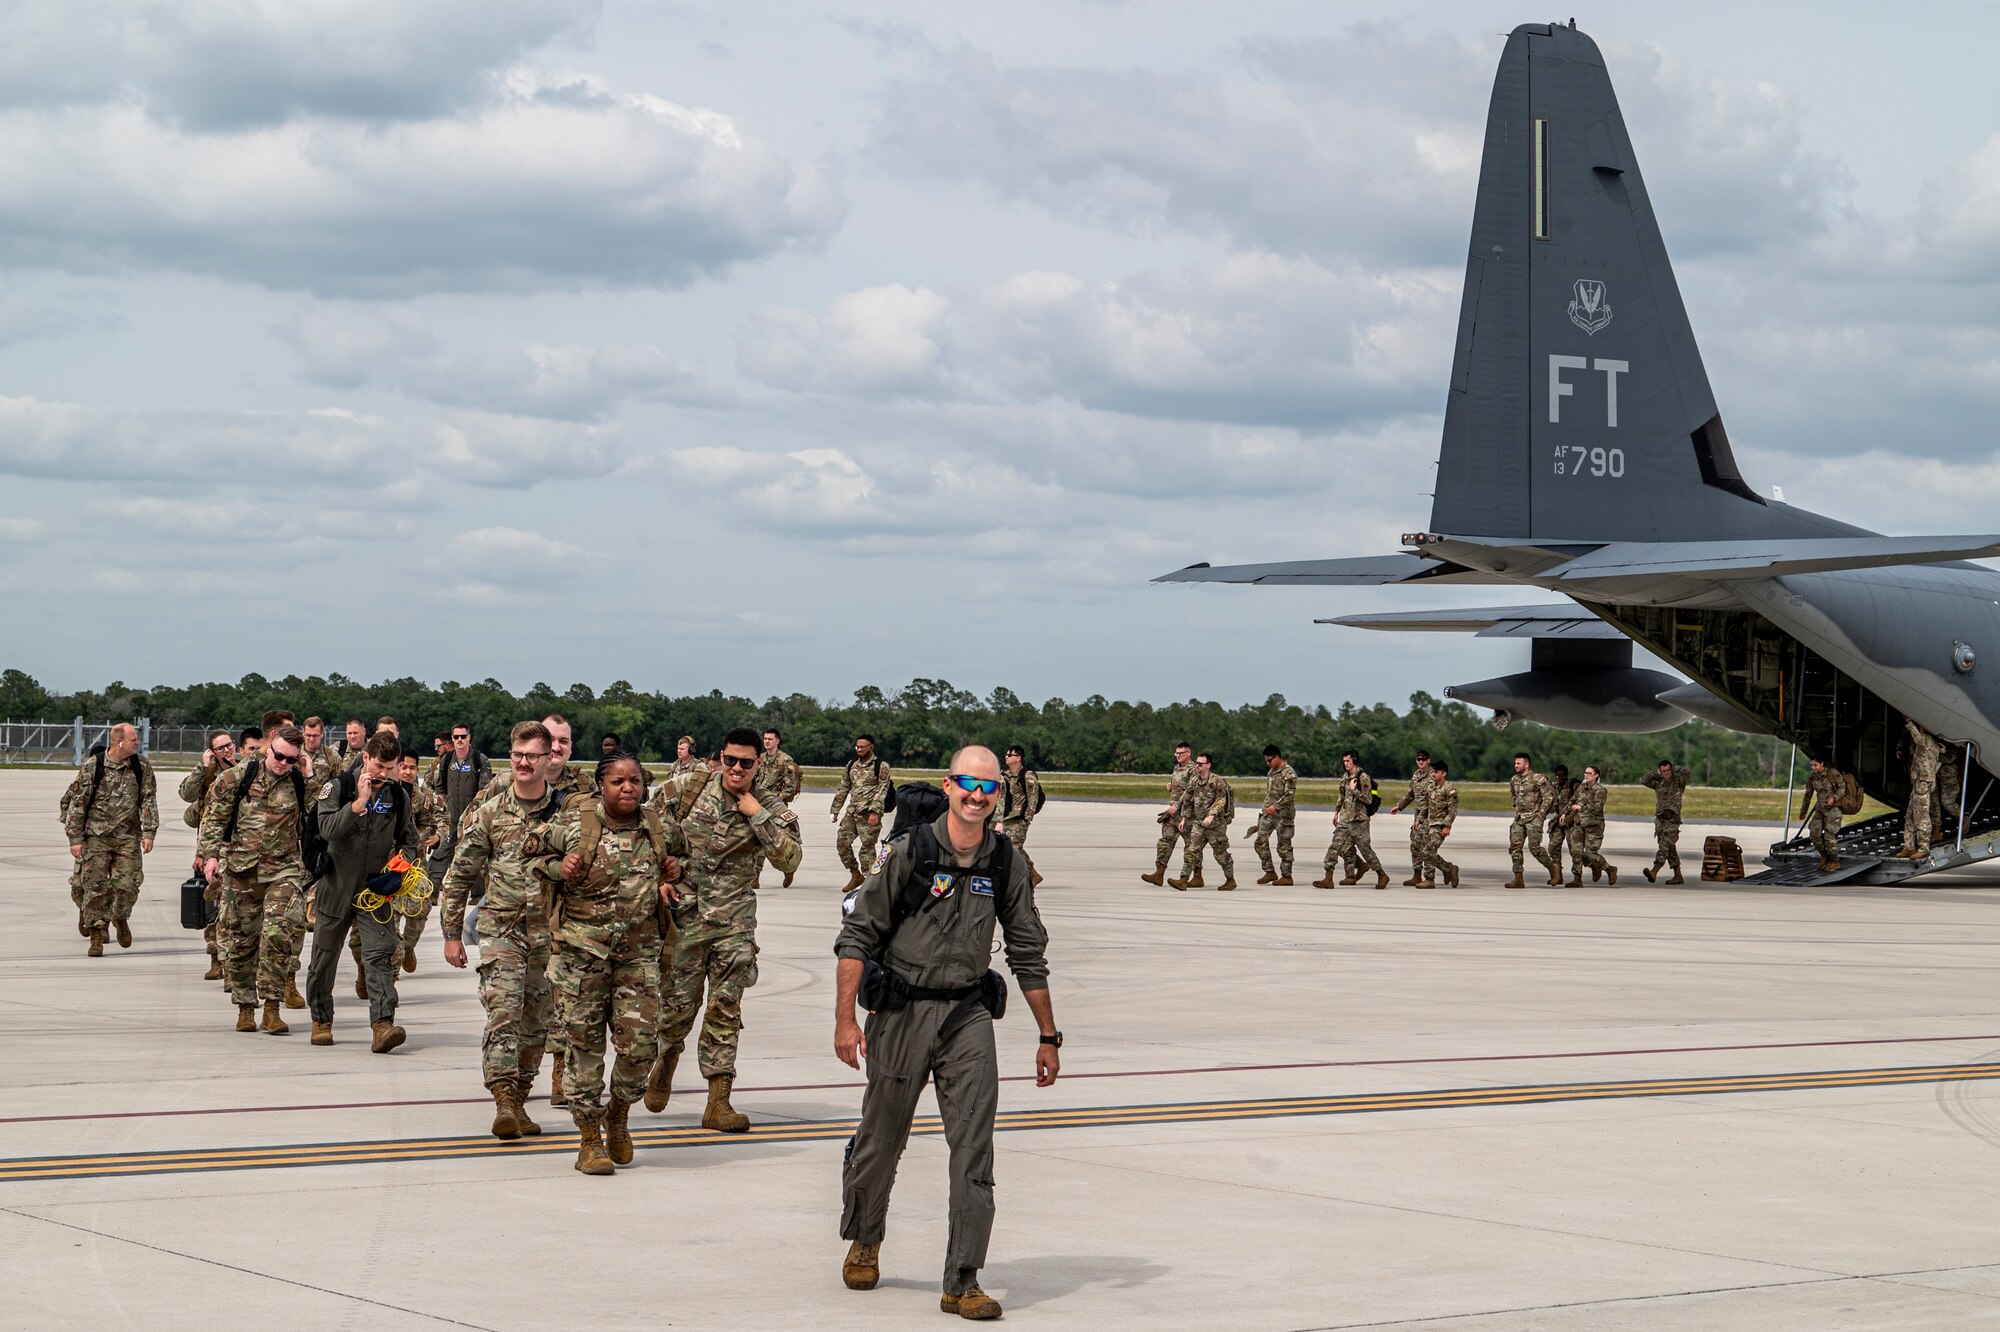 U.S. Air Force Airmen assigned to the 23rd Wing arrive at Avon Park Air Force Range, Florida, for exercise Ready Tiger 24-1, April 9, 2024. Due to its remote location and limited facilities, Avon Park AFR is frequently used to simulate austere location during Agile Combat Employment training.  (U.S. Air Force photo by Airman 1st Class Leonid Soubbotine)